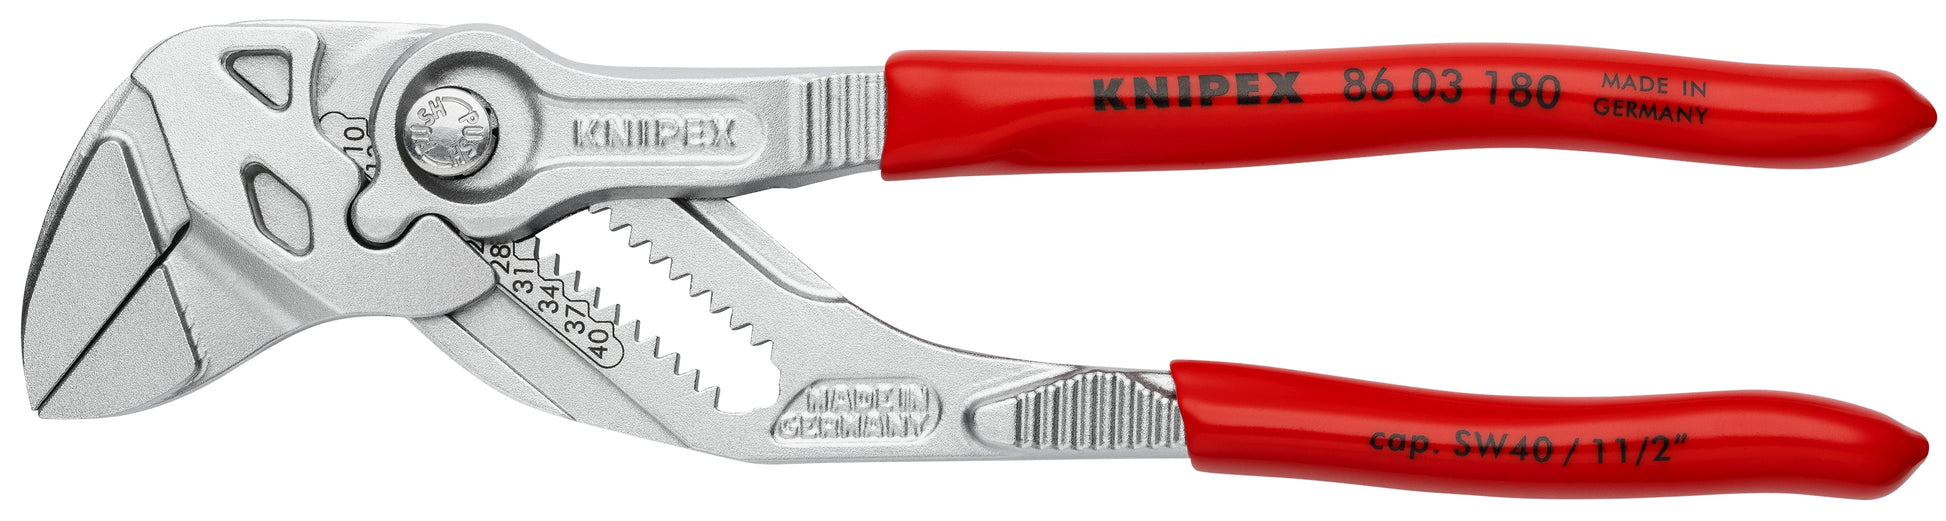 Knipex 3 Pc Black Pliers Wrench Set - 00 20 06 US3